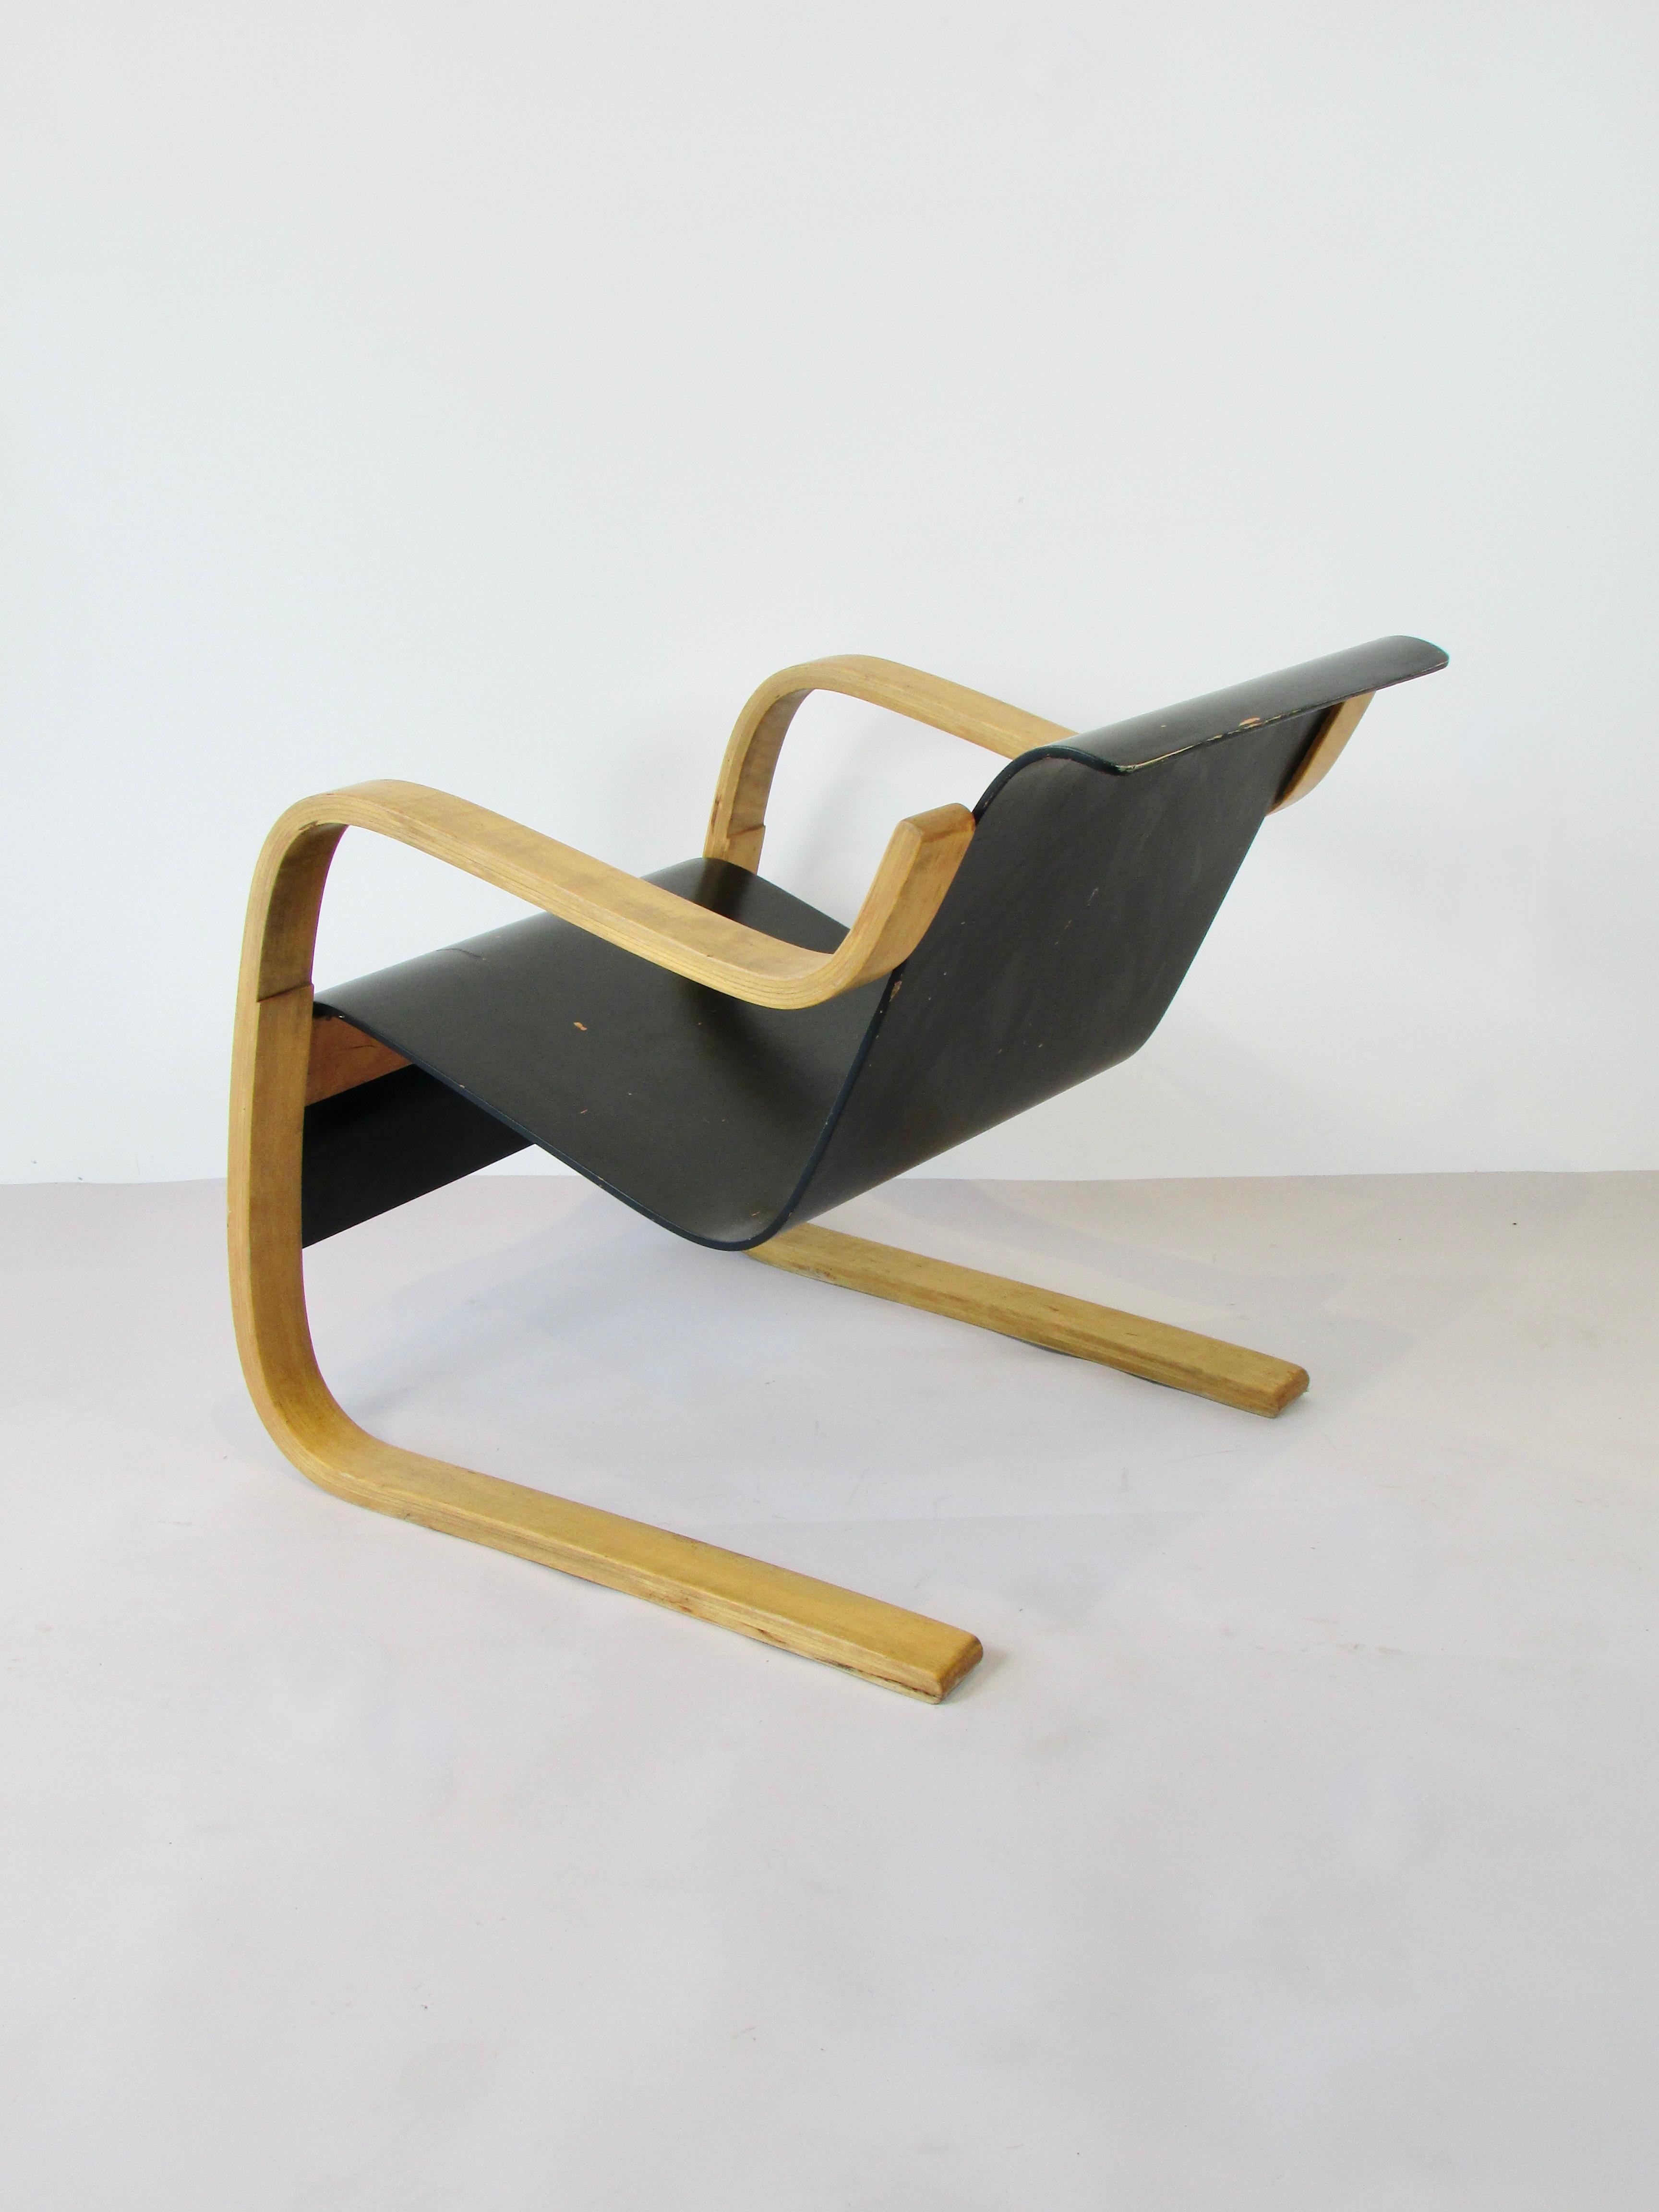 Alvar Aalto Model 31 Cantilevered Lounge Chair In Good Condition For Sale In Ferndale, MI